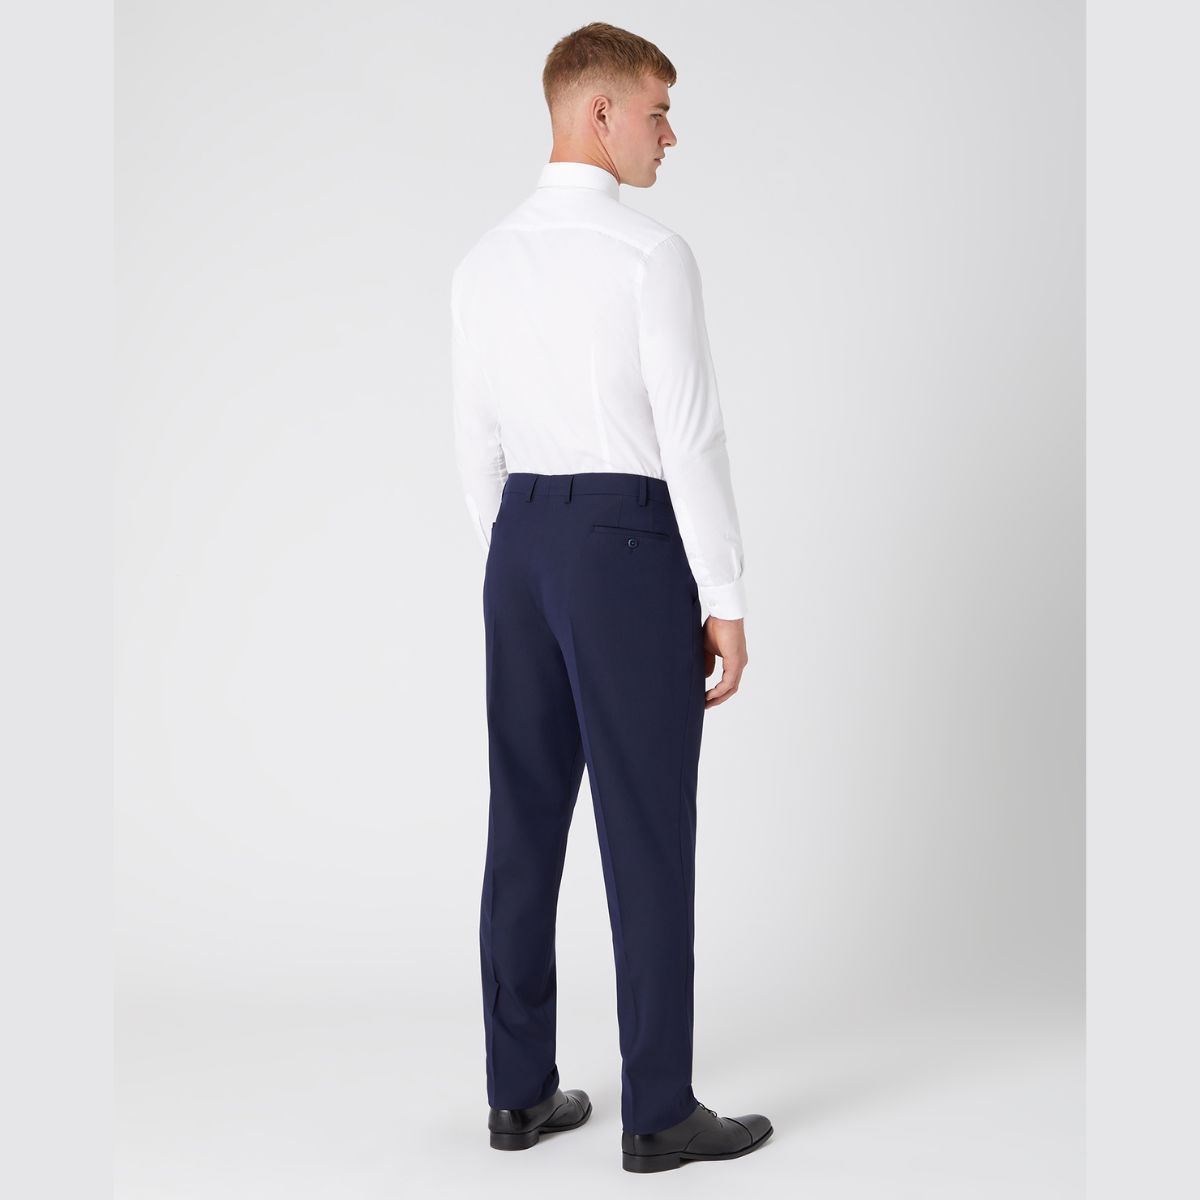 Remus Uomo Tapered Fit Suit Trousers - Navy